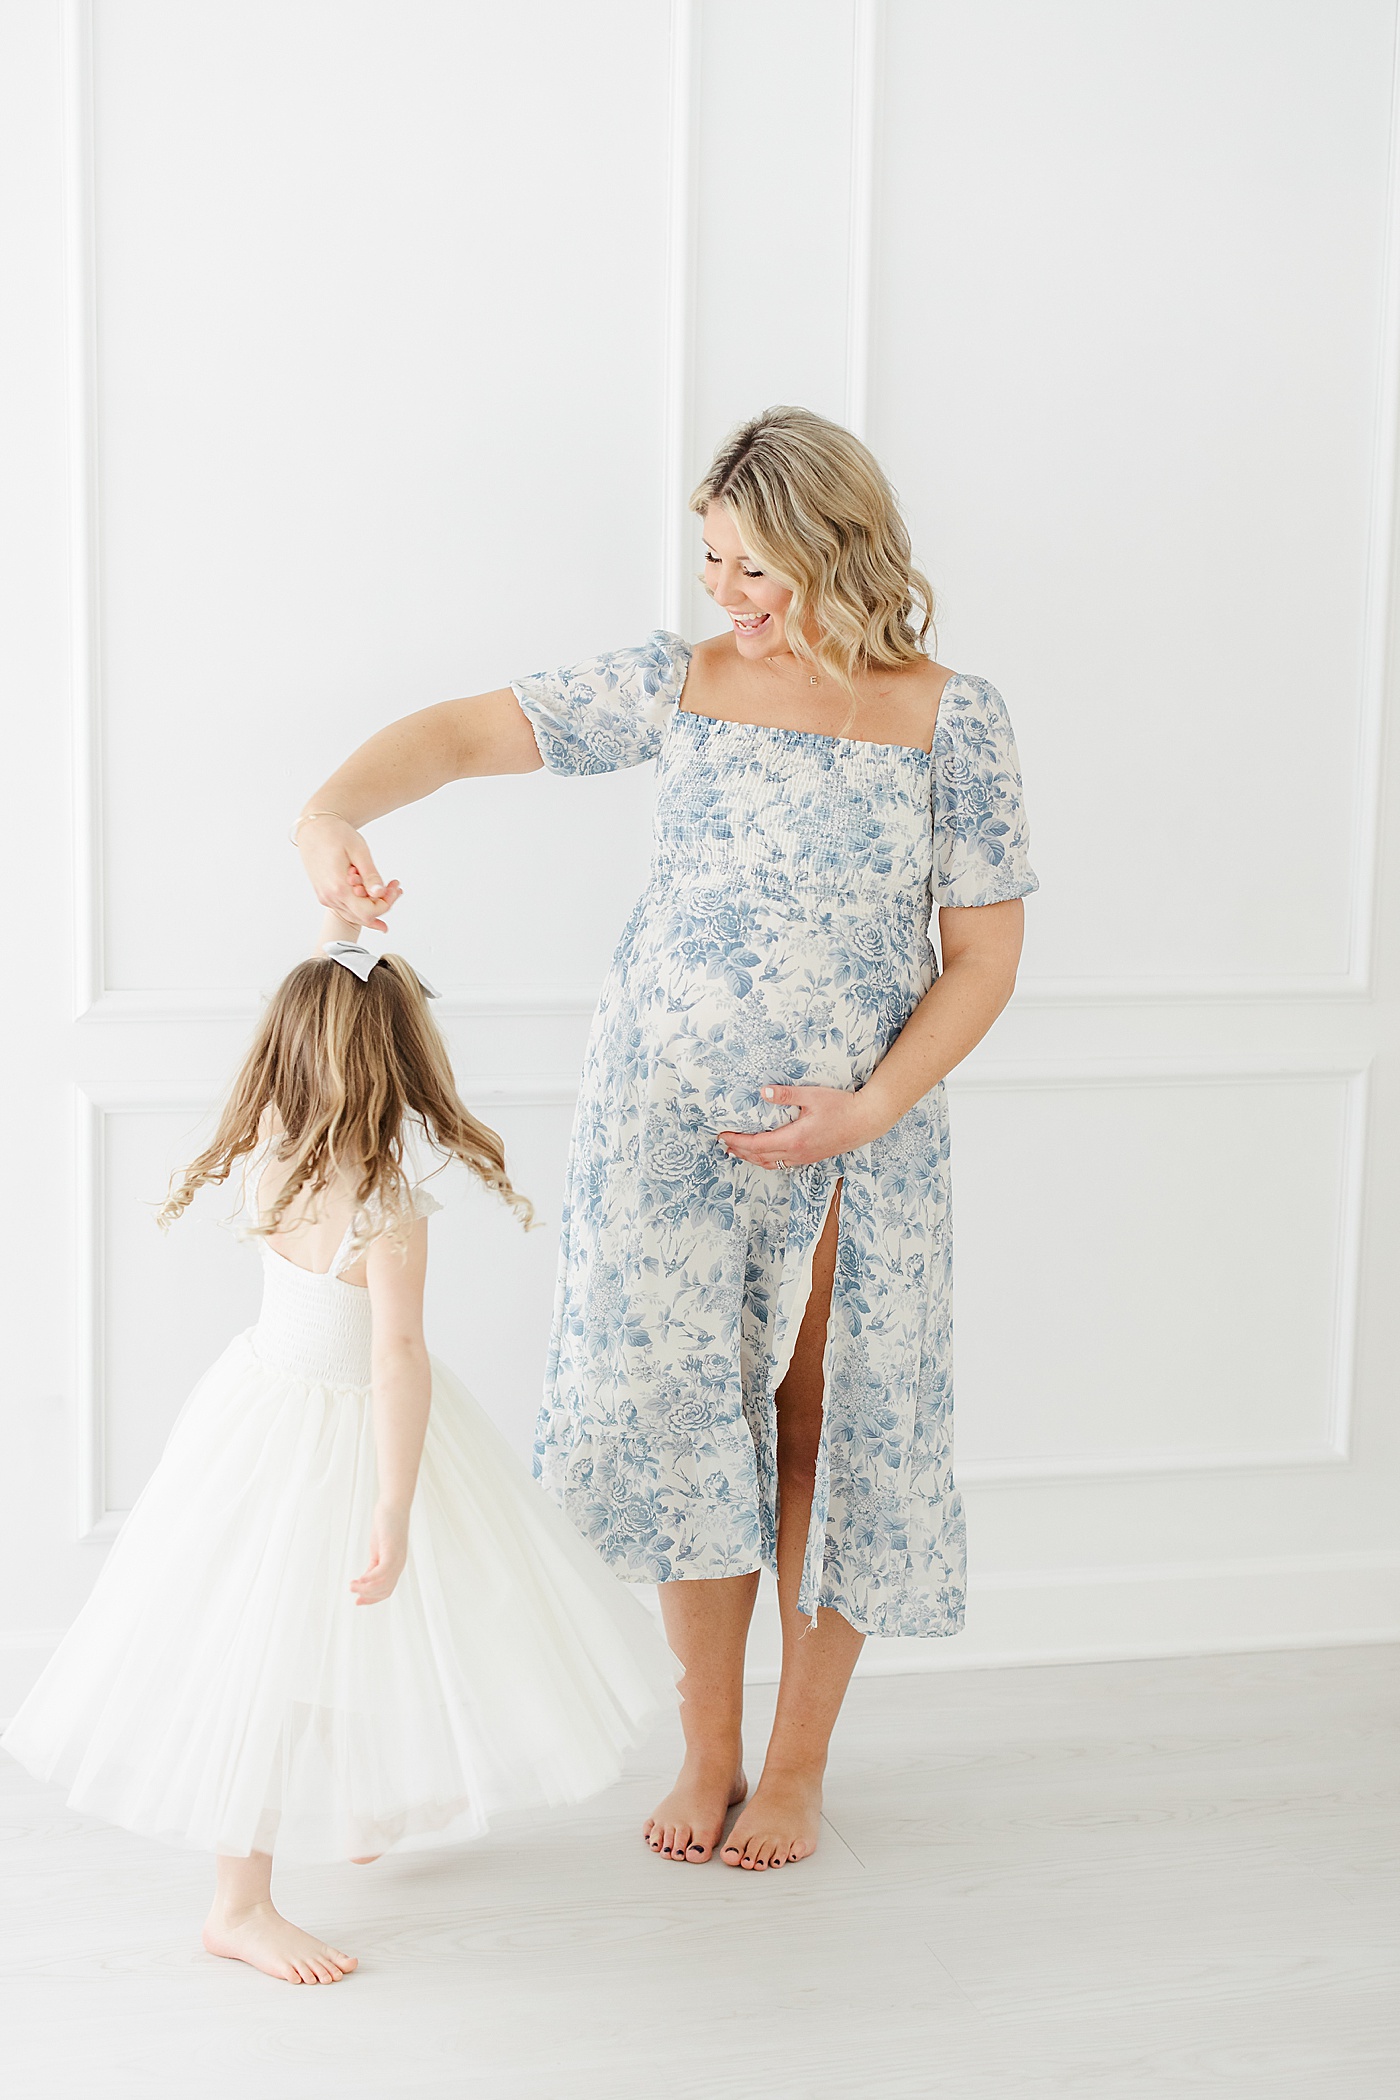 Mom dancing with her daughter during maternity photoshoot | Kristin Wood Photography